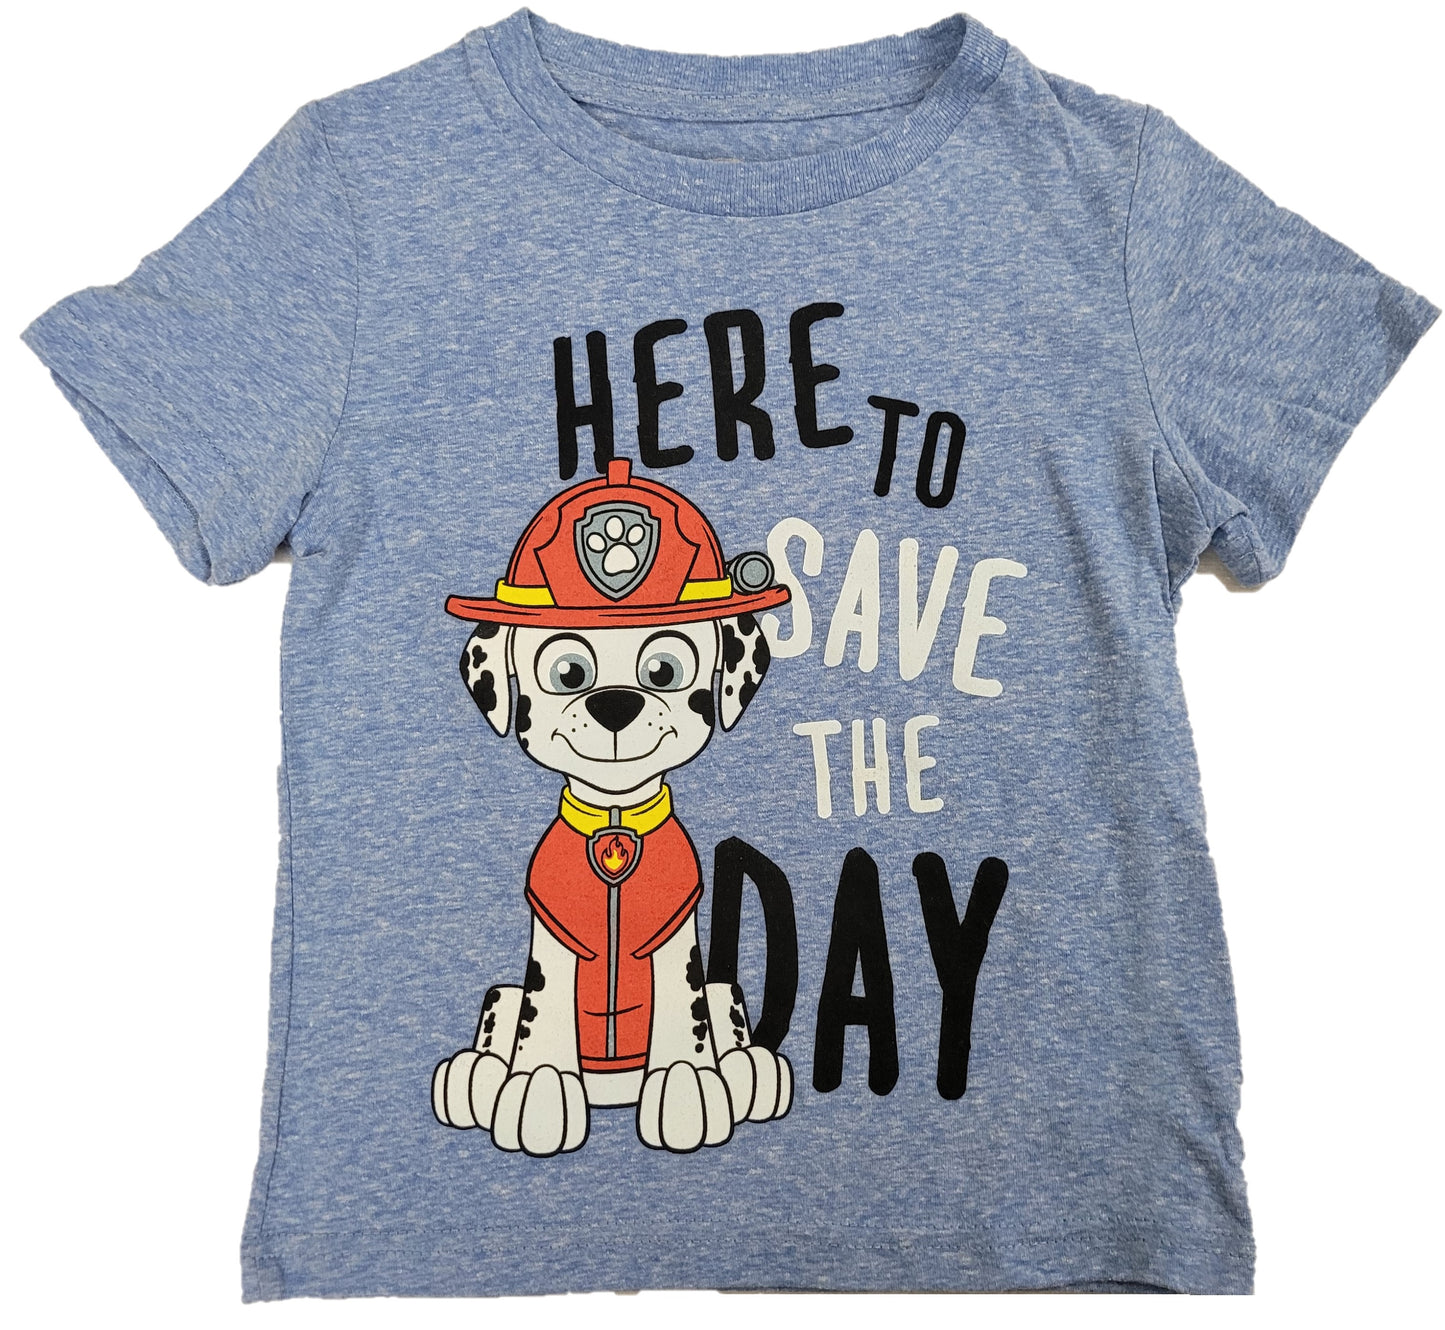 Here to Save the Day Paw Patrol Boys T-Shirt (Blue)